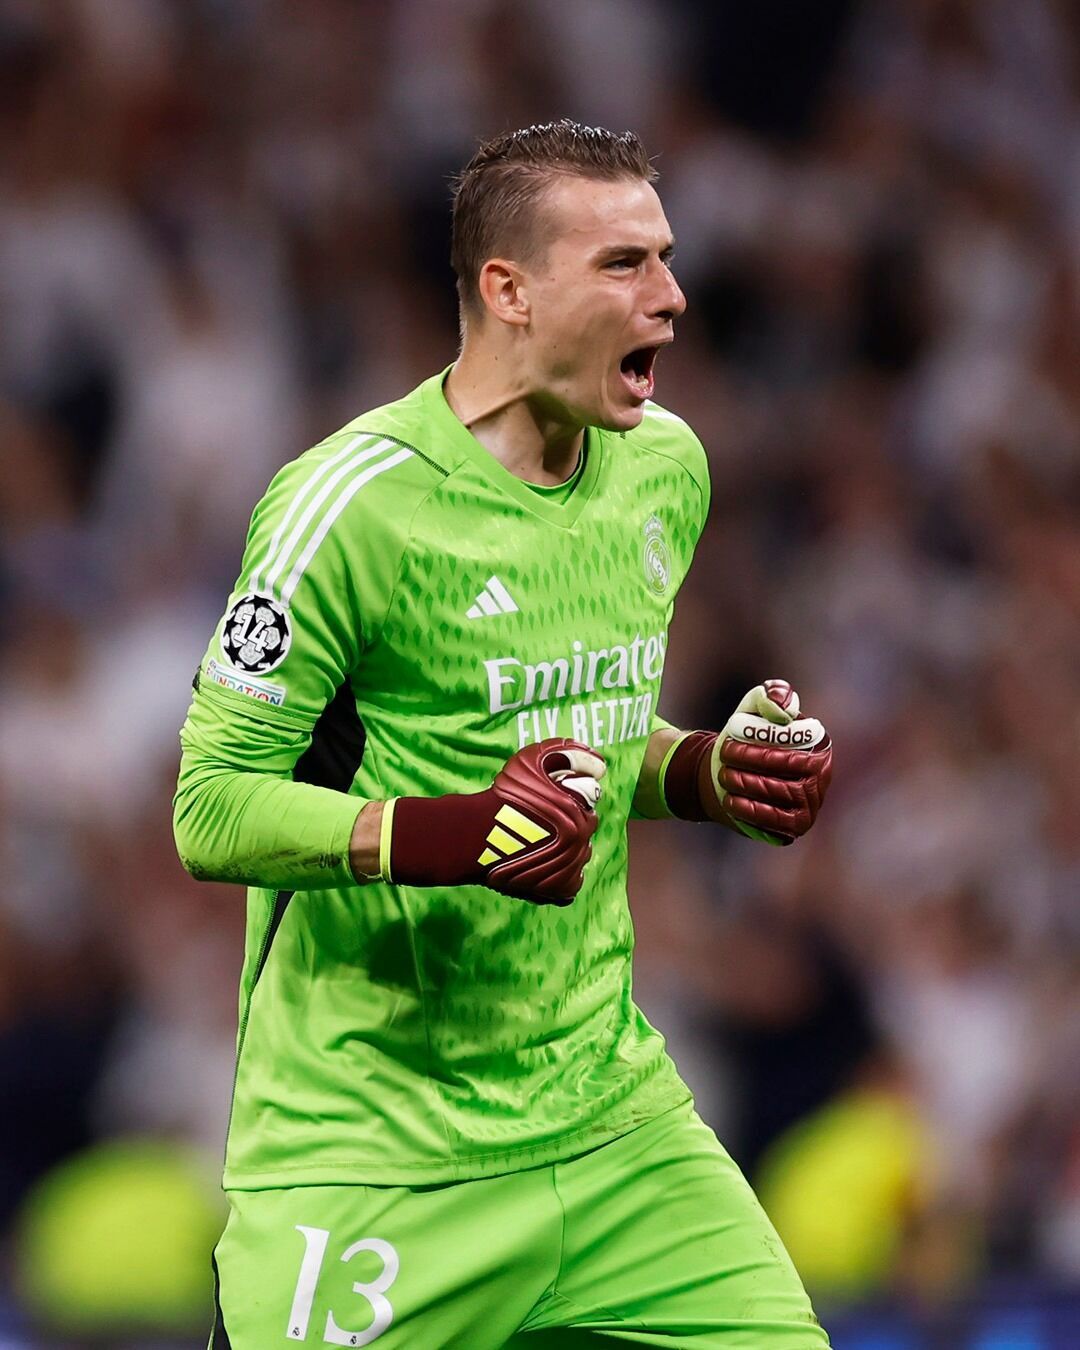 Real Madrid coach replaces Ukrainian goalkeeper with 18-year-old Spaniard ahead of Champions League final